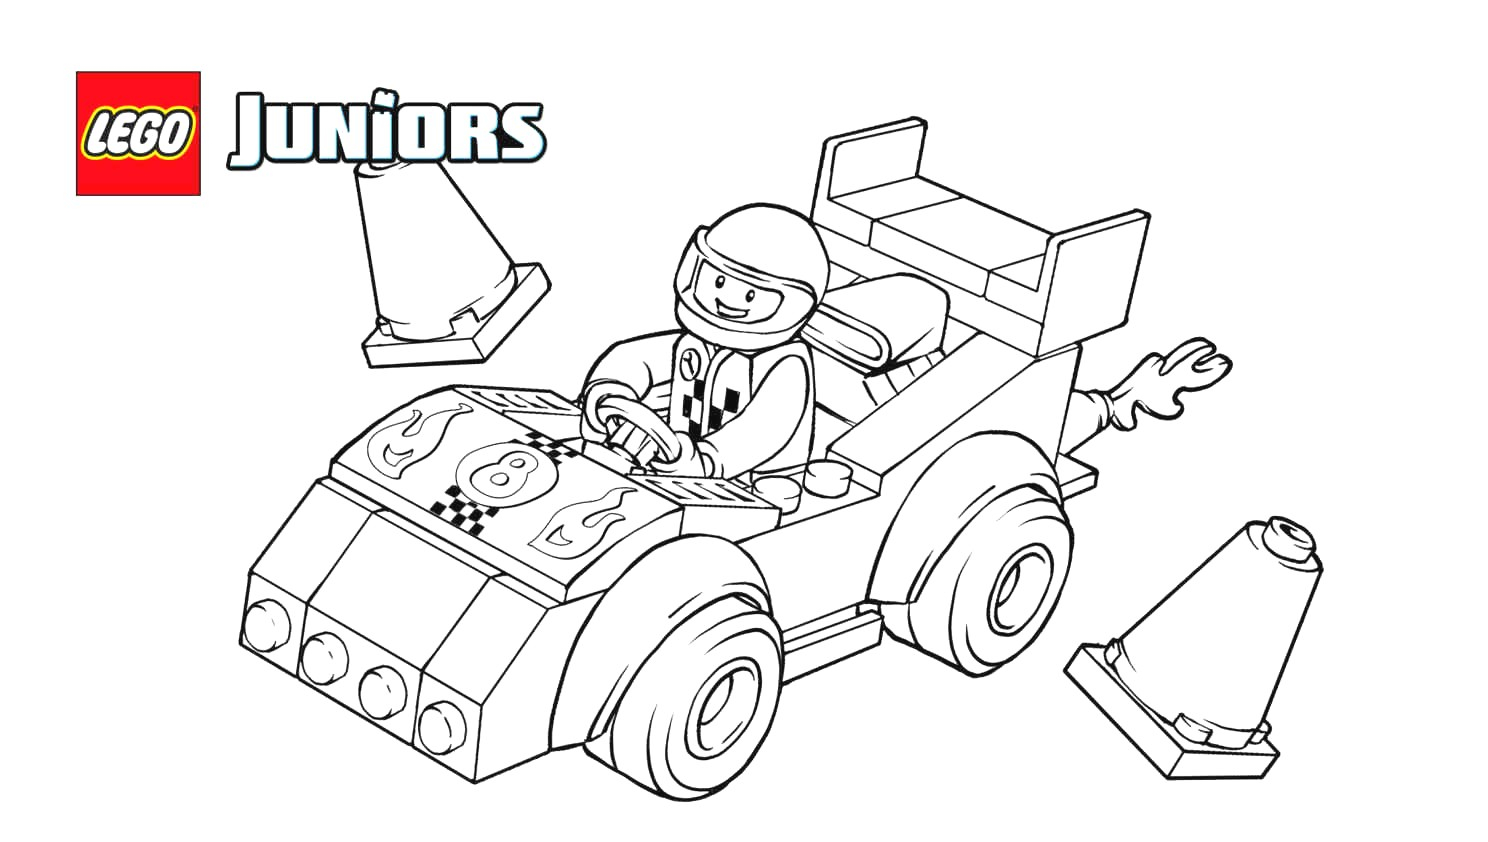 Coloring Page Of A Race Car Practical Coloring Page Race Car Lego Juniors 3928 Ageanddignity